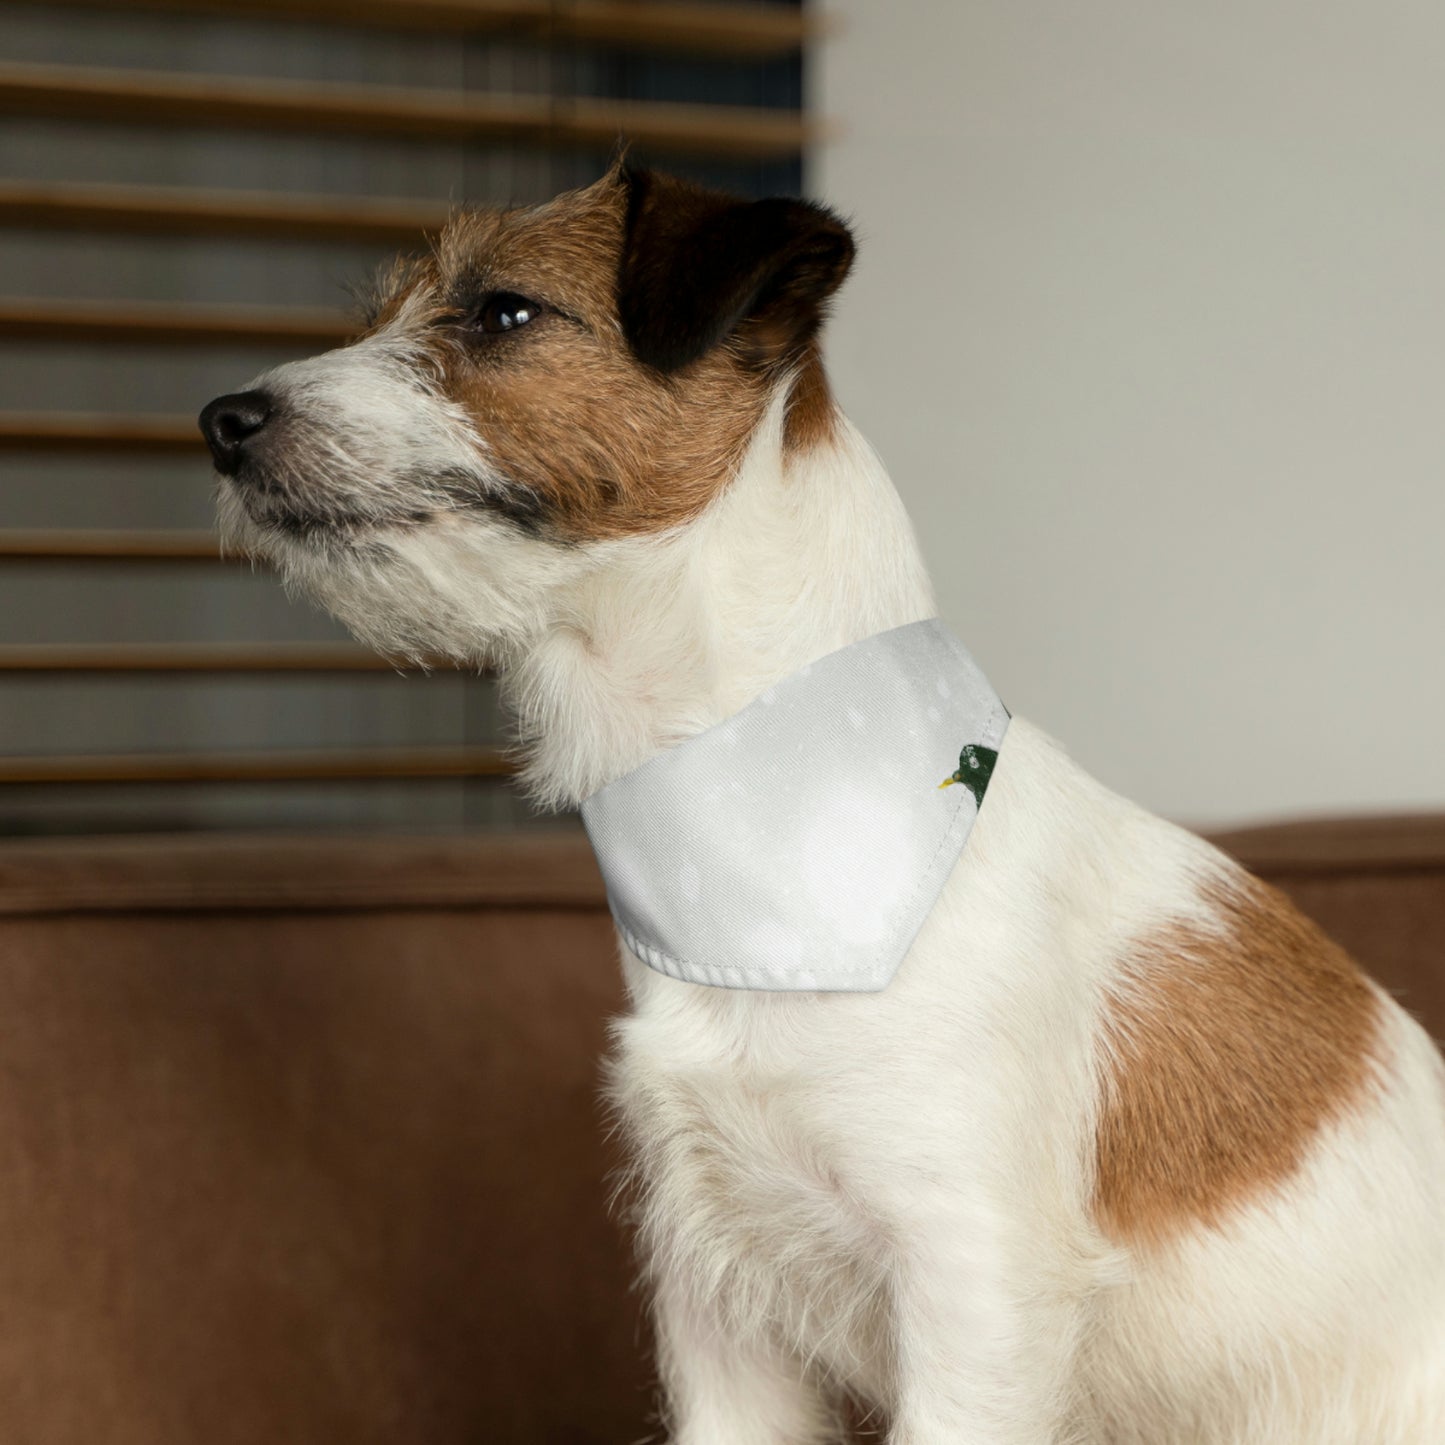 "The Solitary Nest-Builder in the Snow" - The Alien Pet Bandana Collar